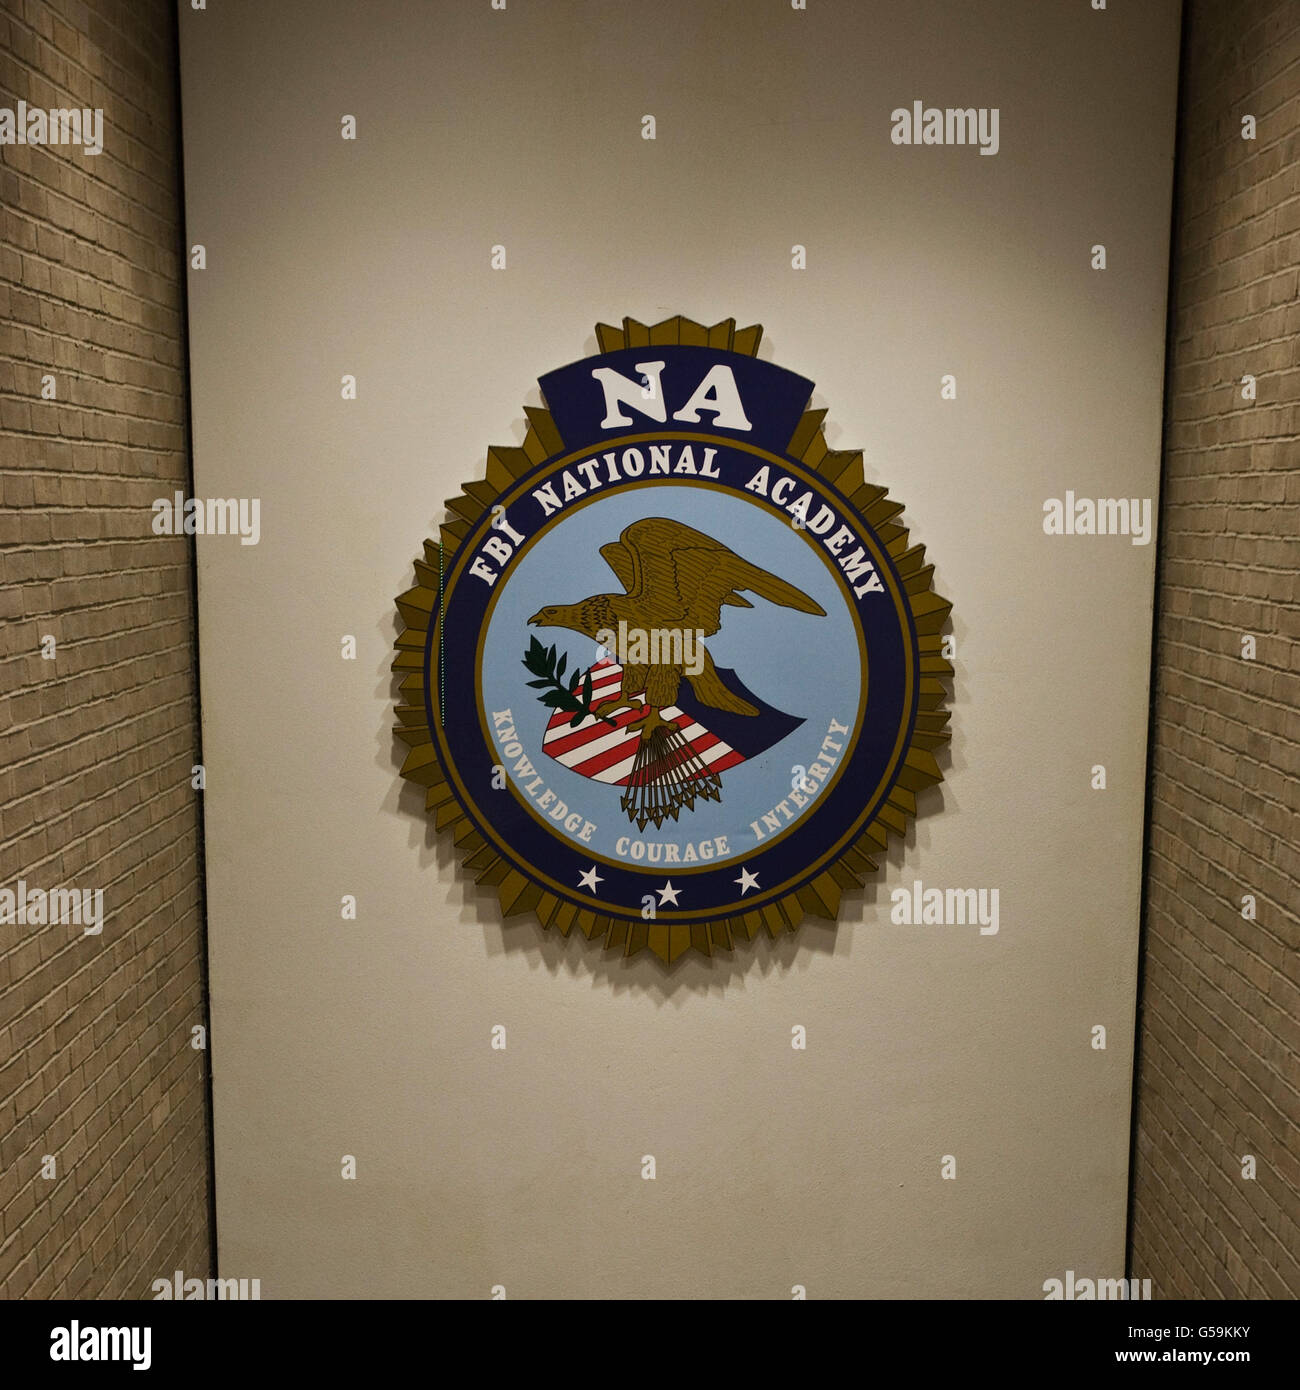 View of a emblem on a wall at the FBI National Academy in Quantico, VA, USA, 12 May 2009. Stock Photo